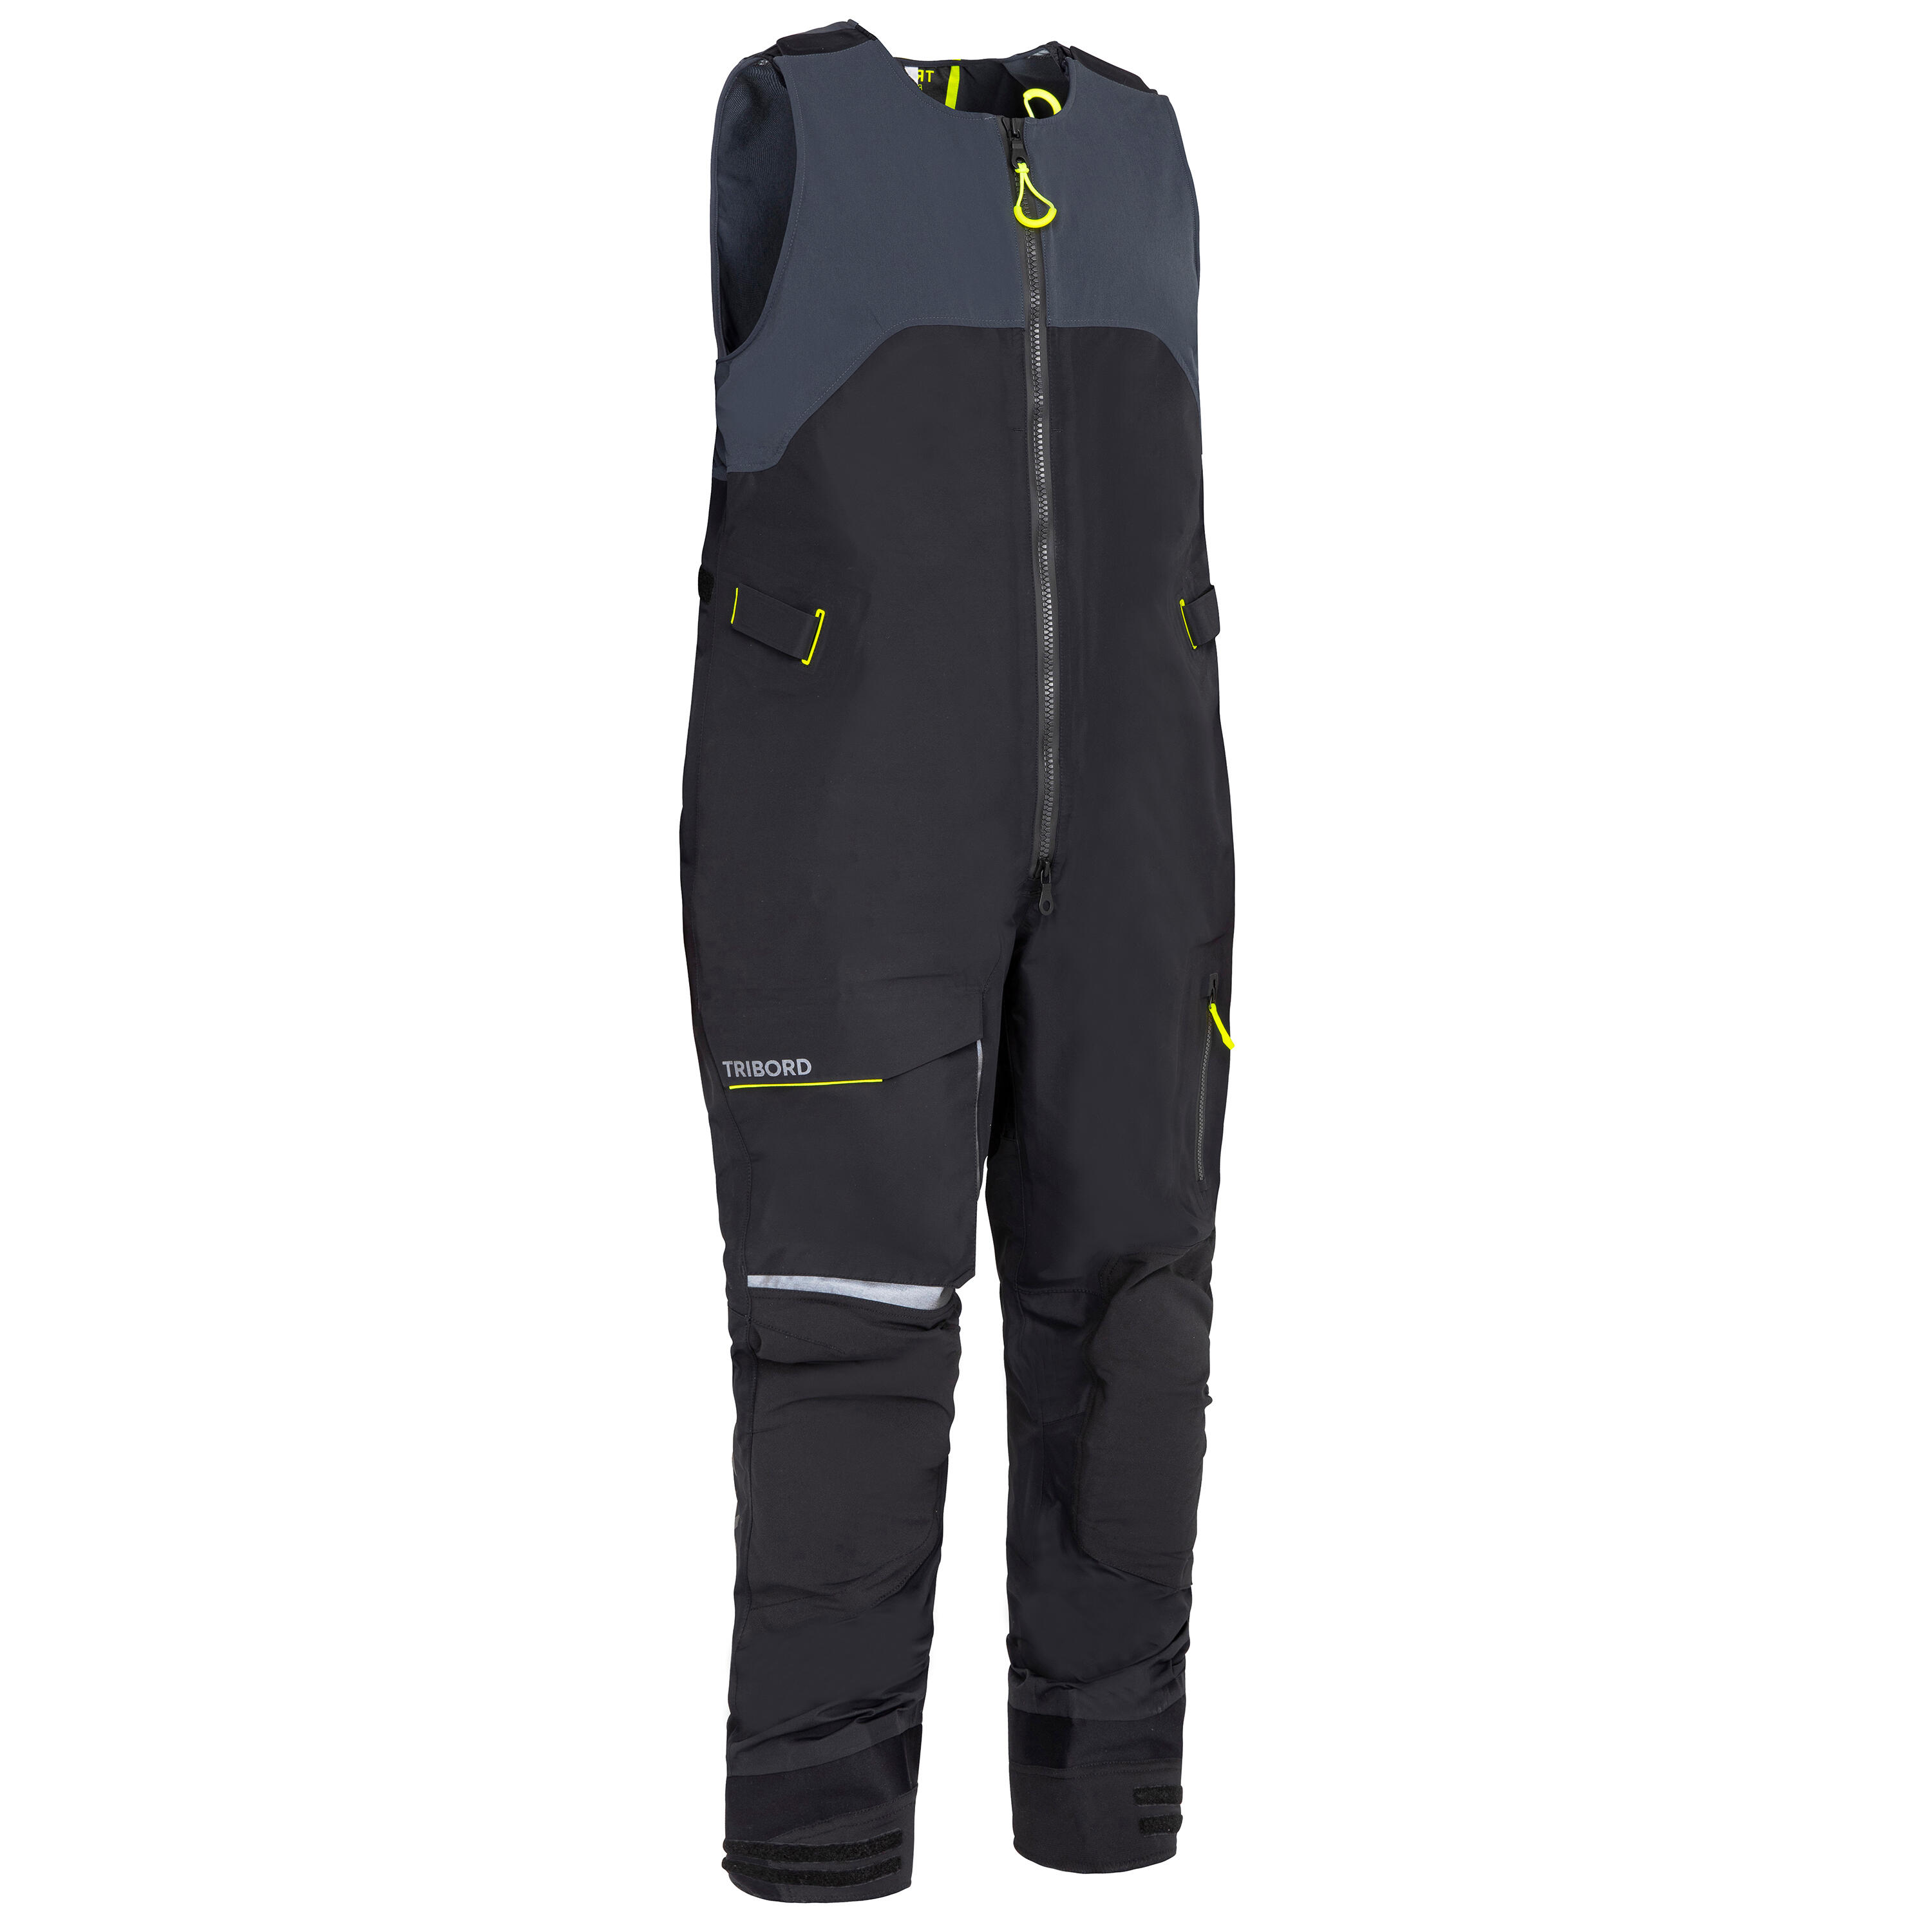 Adult Sailing overalls - Offshore Race 900 Black 1/11